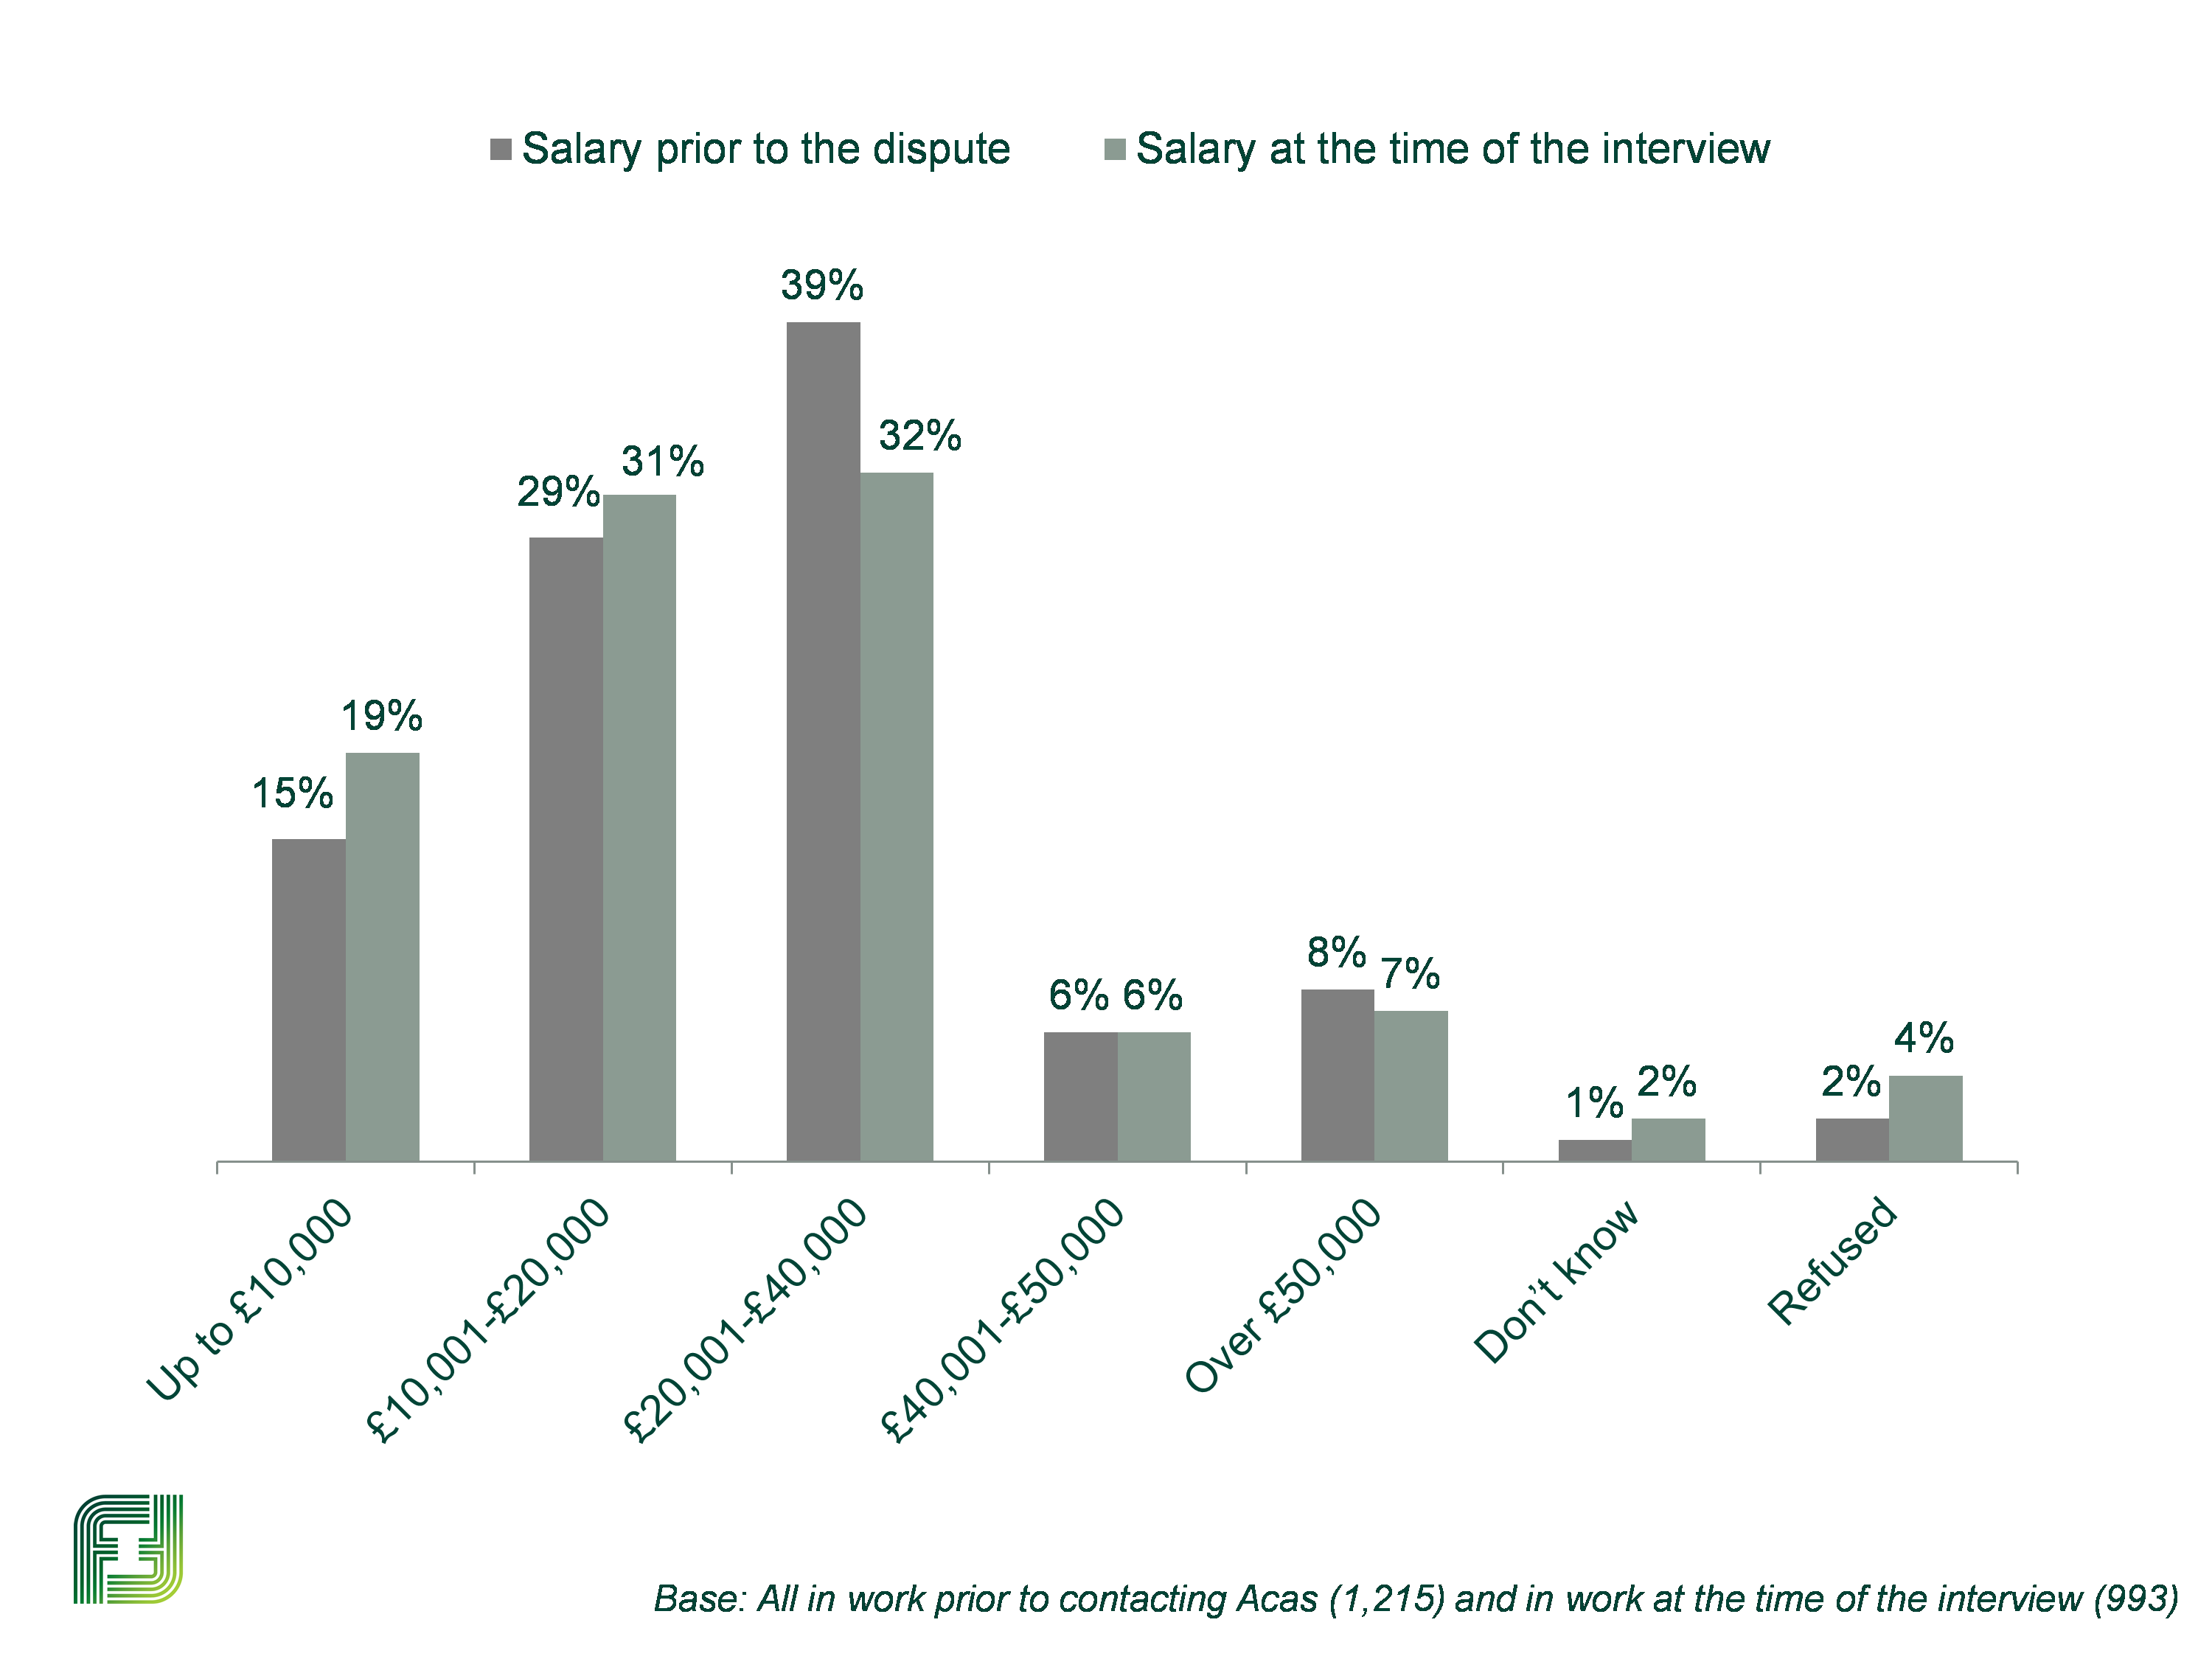 Bar chart showing the variation in claimant salary before the dispute and at the time of interview, as outlined in the previous text.